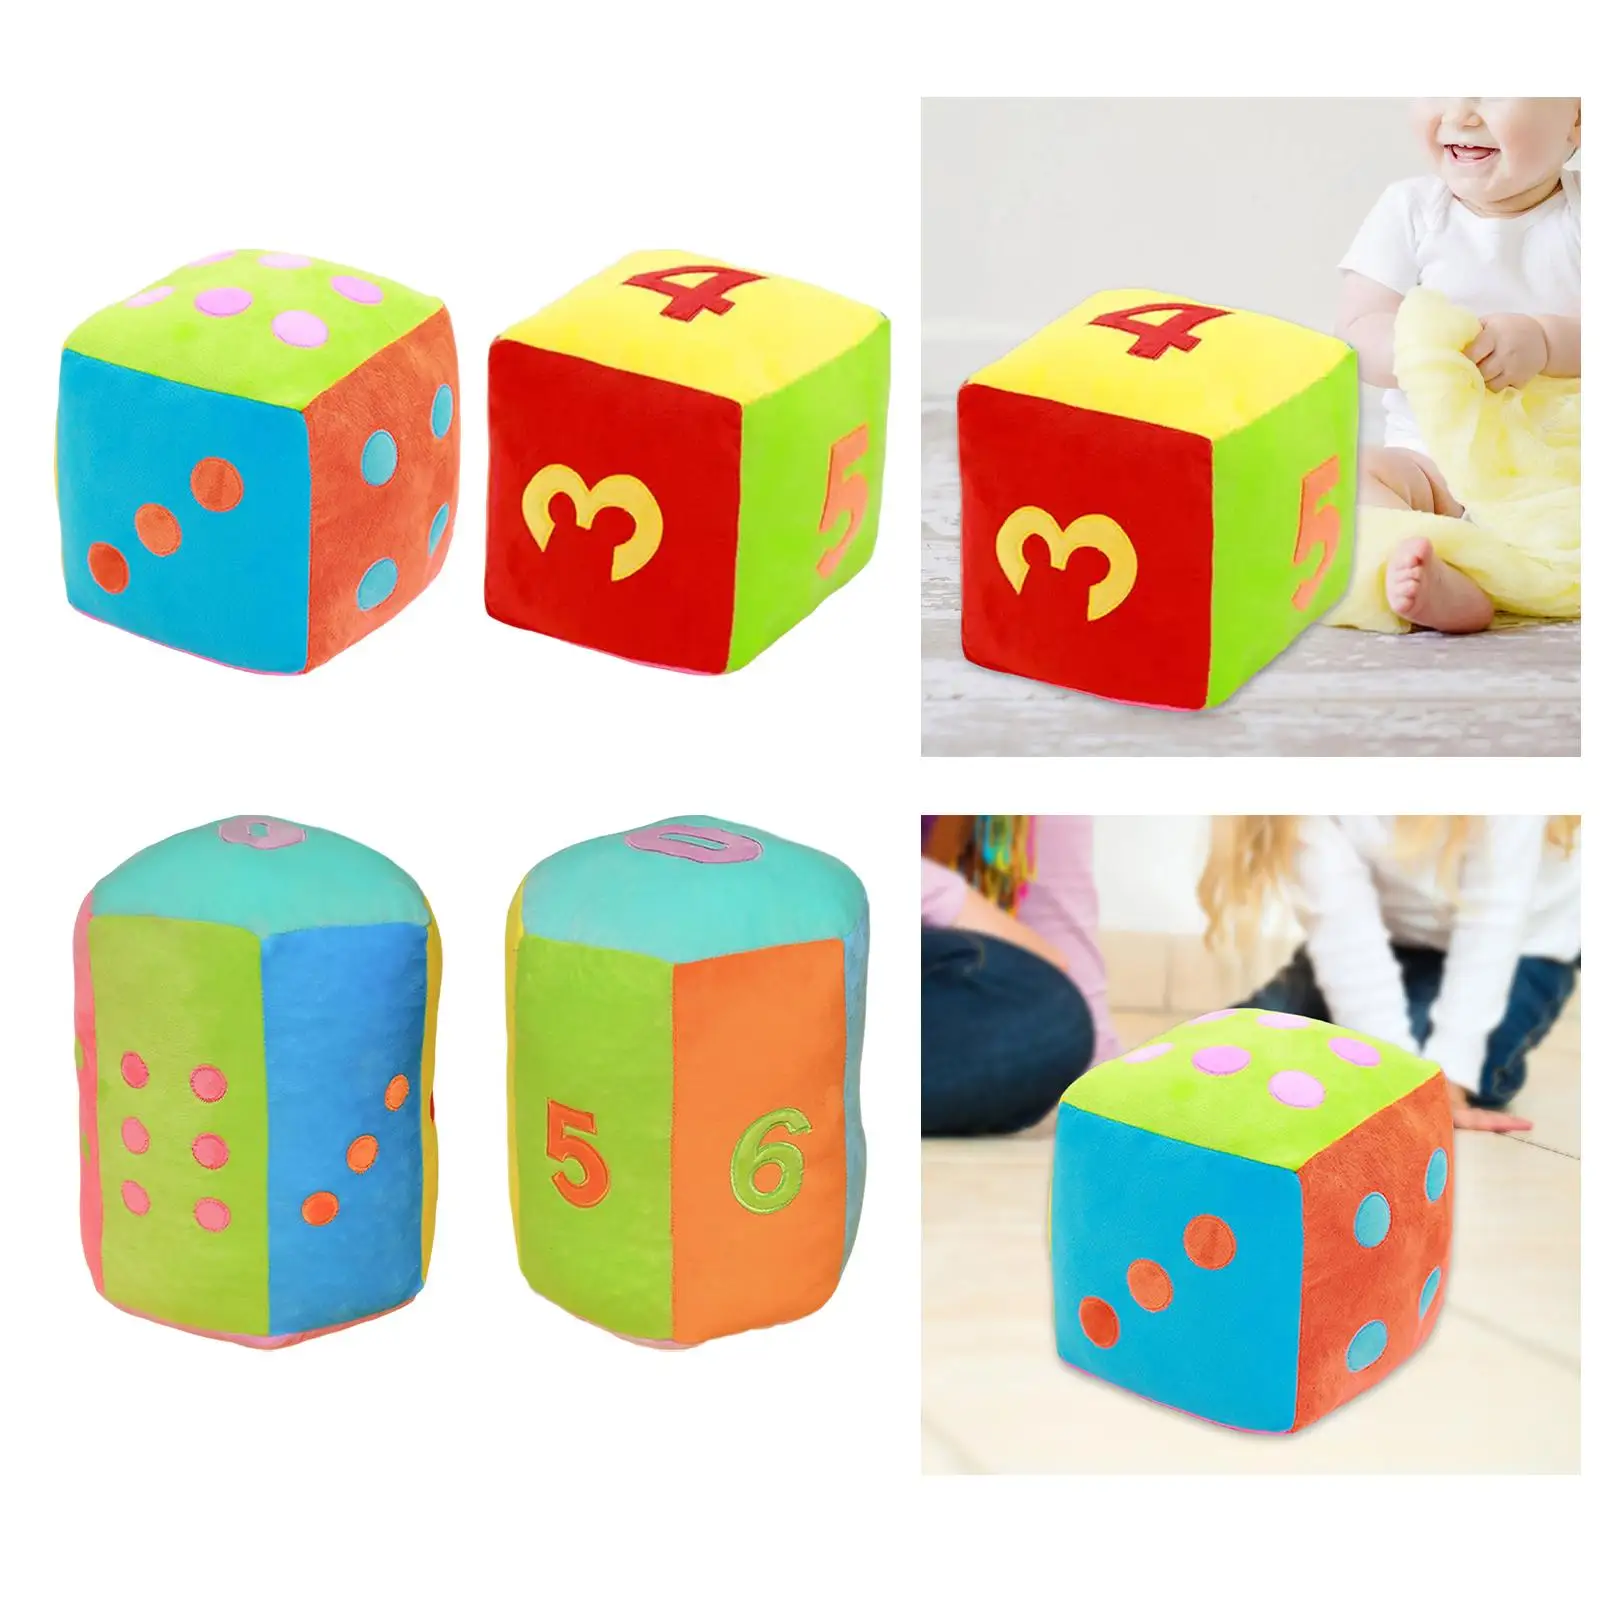 Plush Dice Toy Playing Games Party Favors Educational Party Decorations Ornament Stuffed Toys for Kids Girls Boys Children